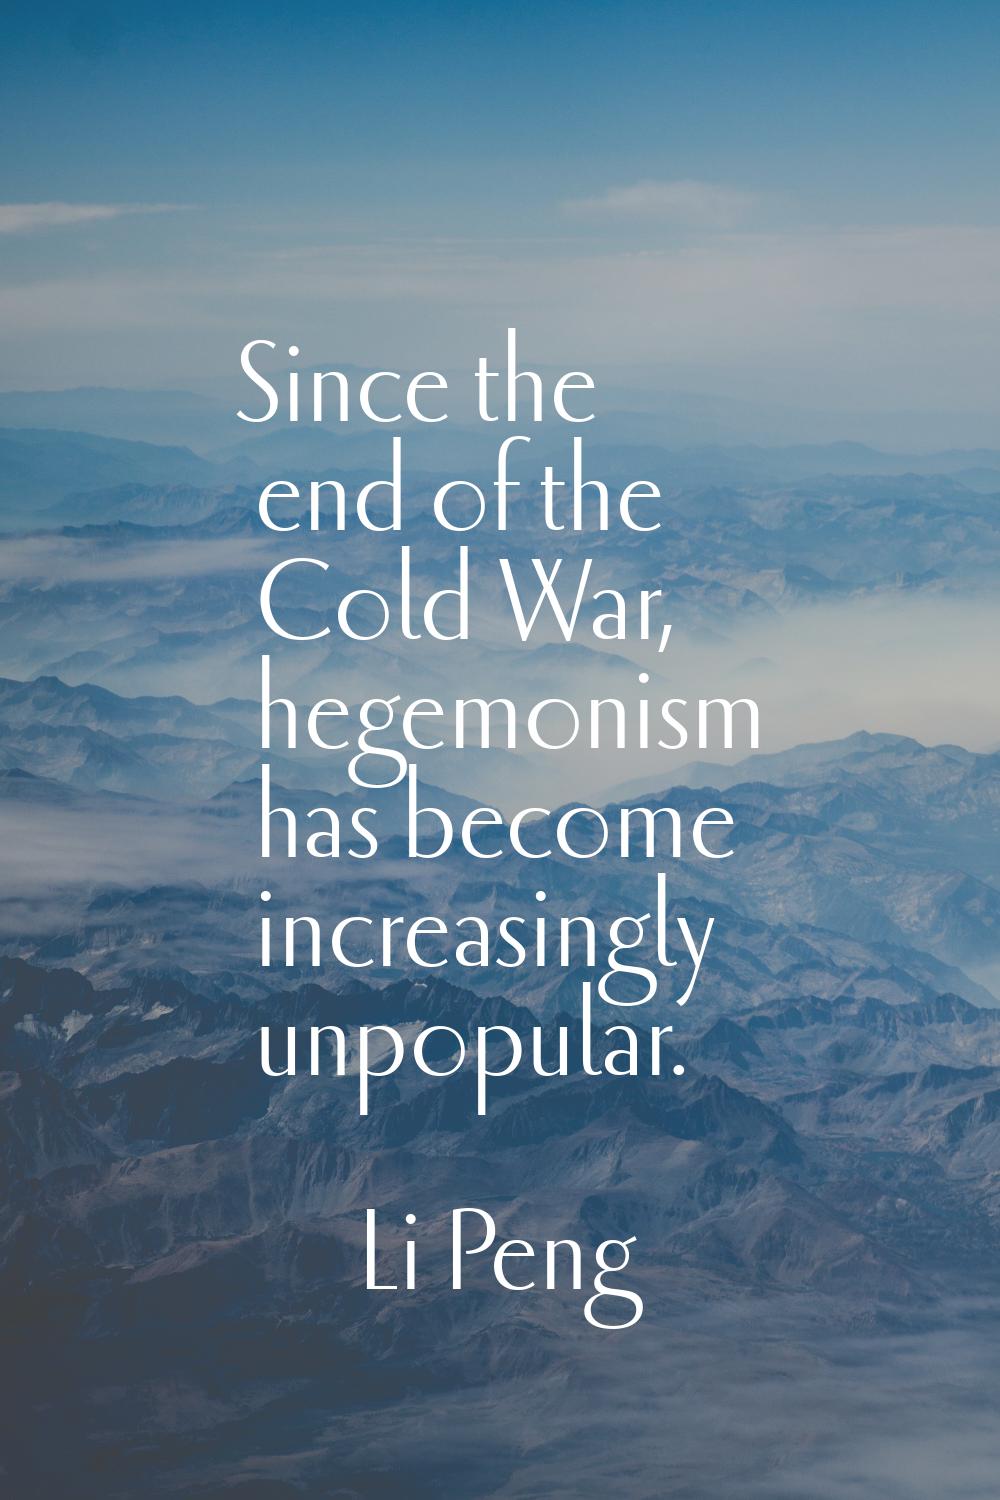 Since the end of the Cold War, hegemonism has become increasingly unpopular.